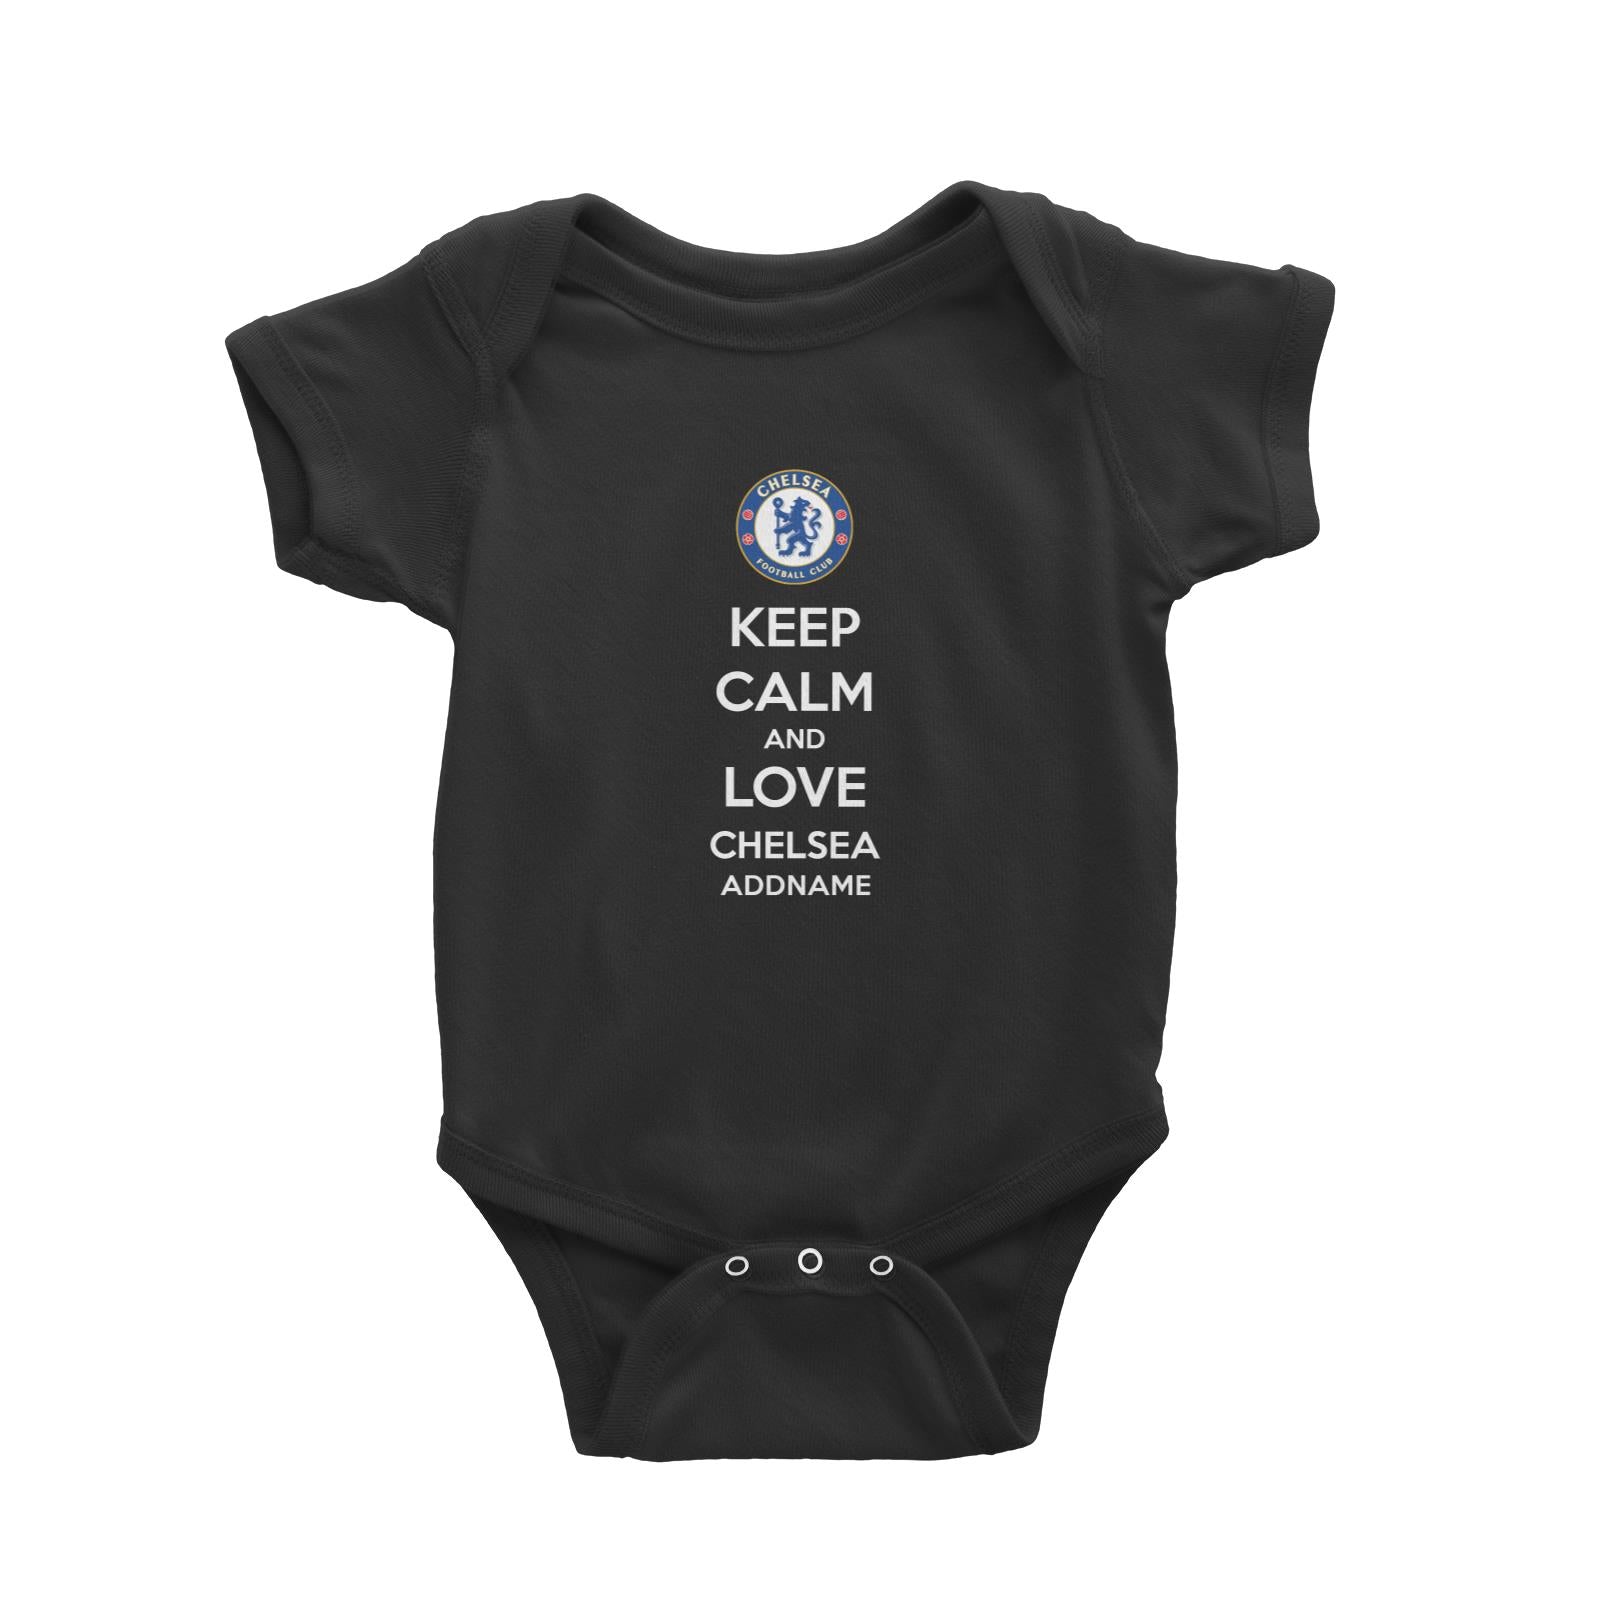 Chelsea Football Keep Calm And Love Series Addname Baby Romper